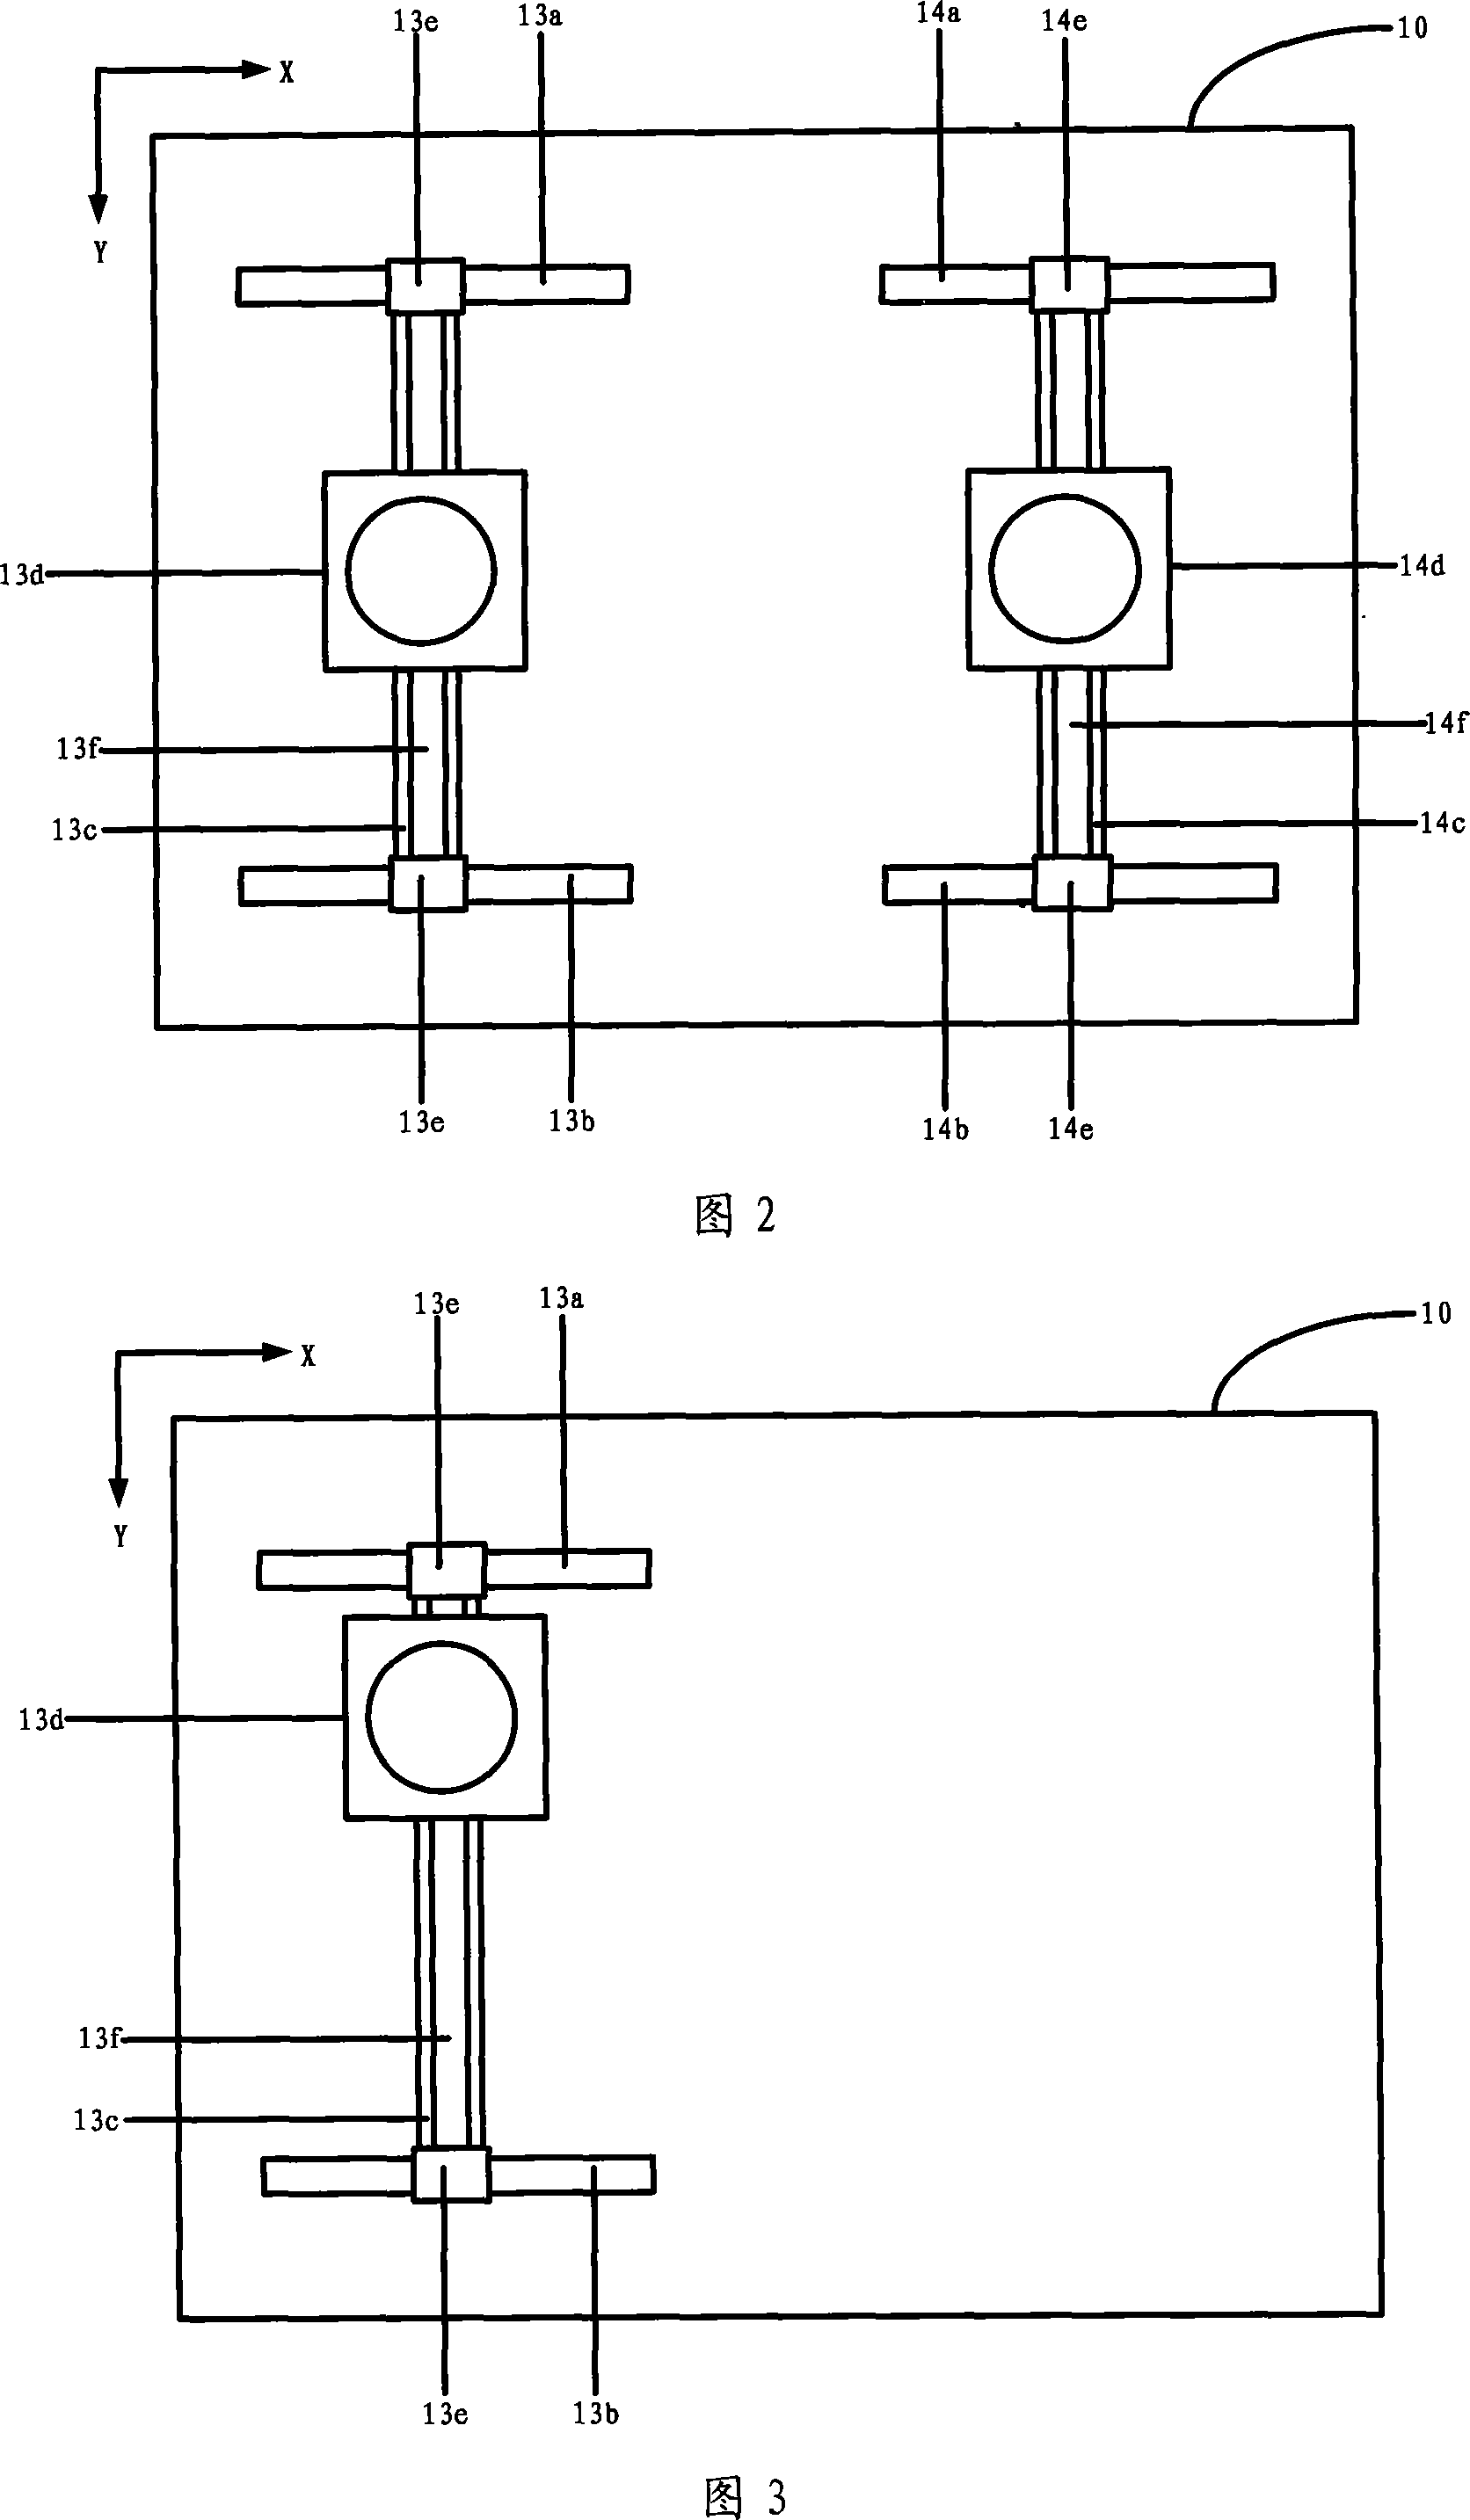 Double platform system for rotary exchange